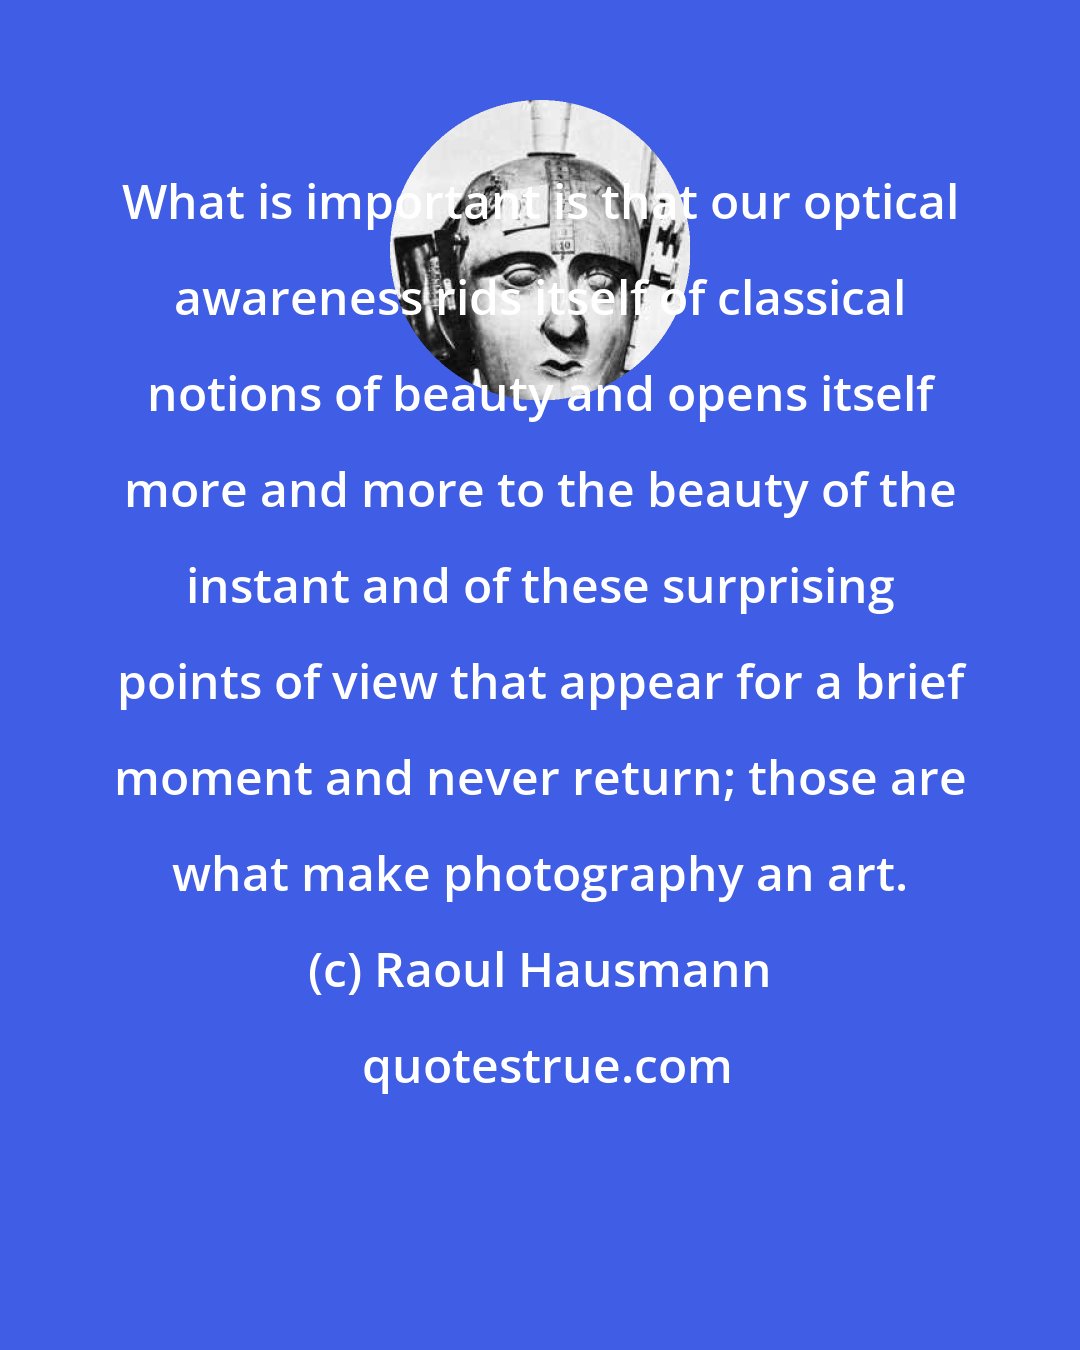 Raoul Hausmann: What is important is that our optical awareness rids itself of classical notions of beauty and opens itself more and more to the beauty of the instant and of these surprising points of view that appear for a brief moment and never return; those are what make photography an art.